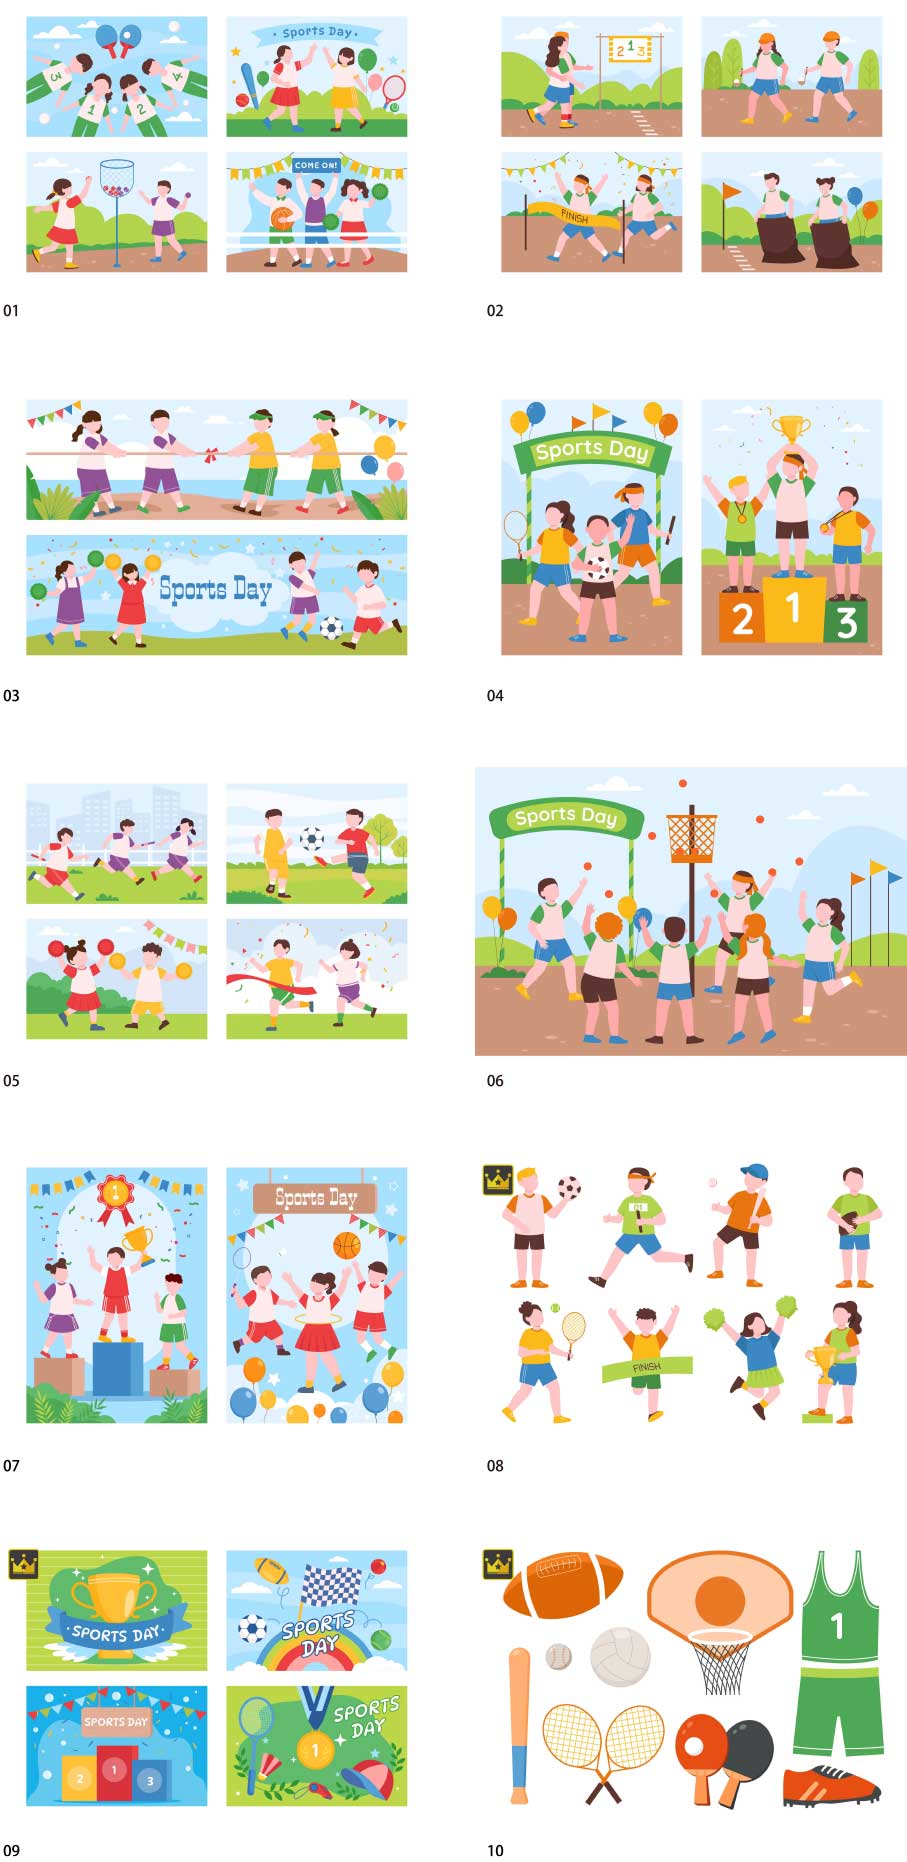 Sports day illustration collection